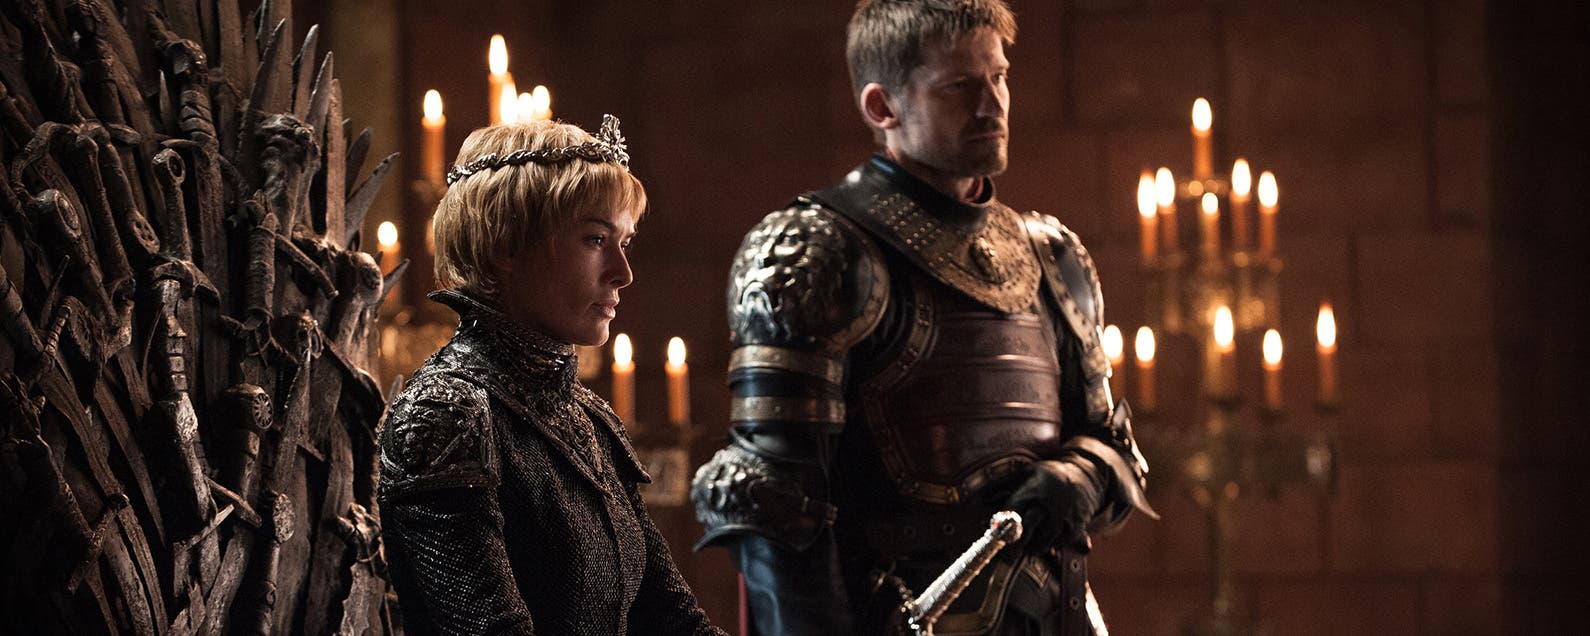 Stream Game of Thrones online: how to watch every season from every country